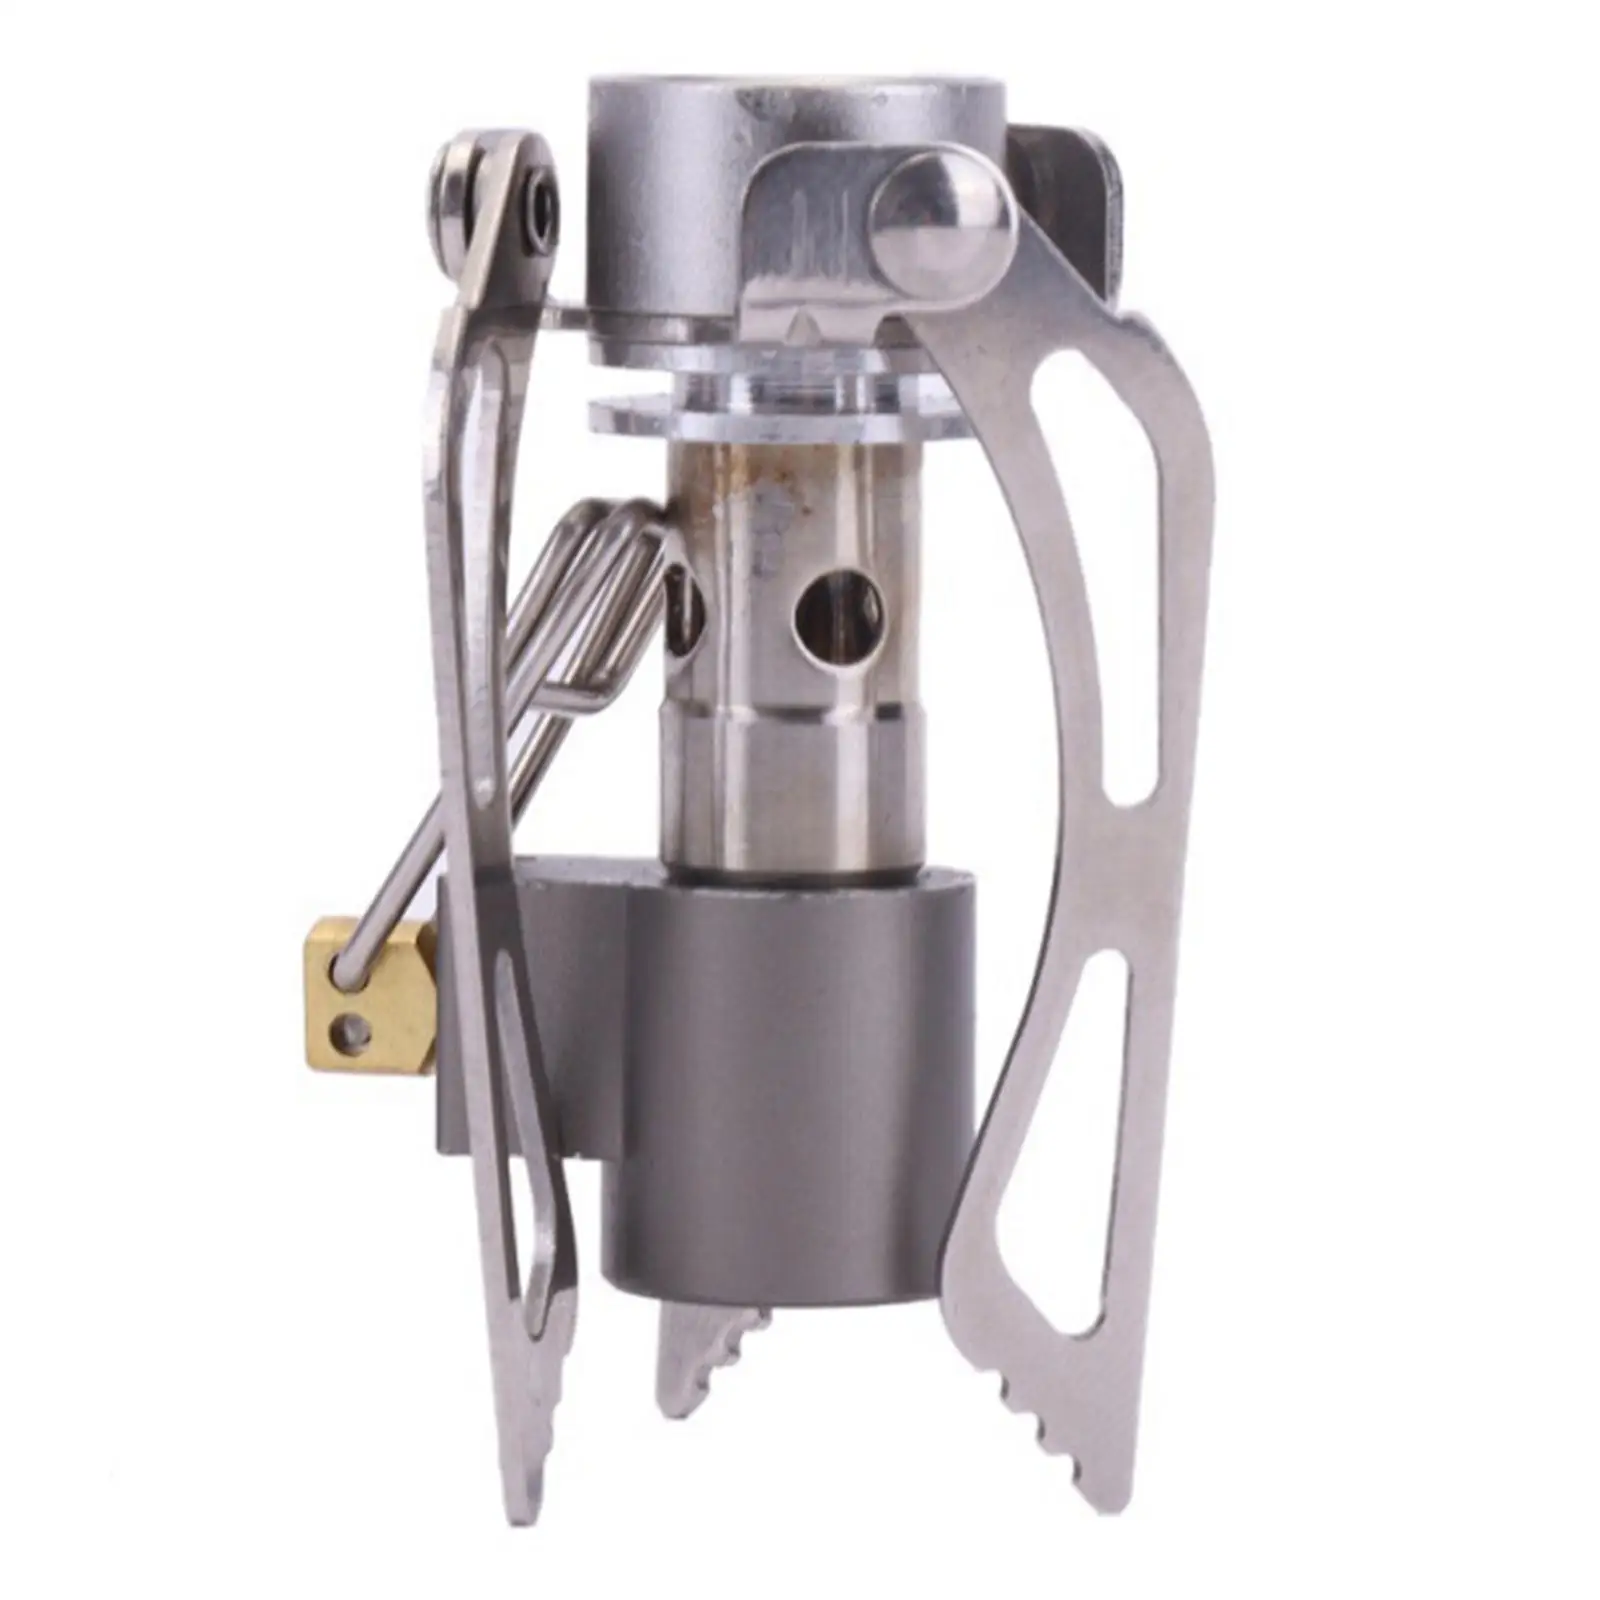 Camping Stove Tourist Burner Outdoor Stainless Steel Oven for Mountaineering